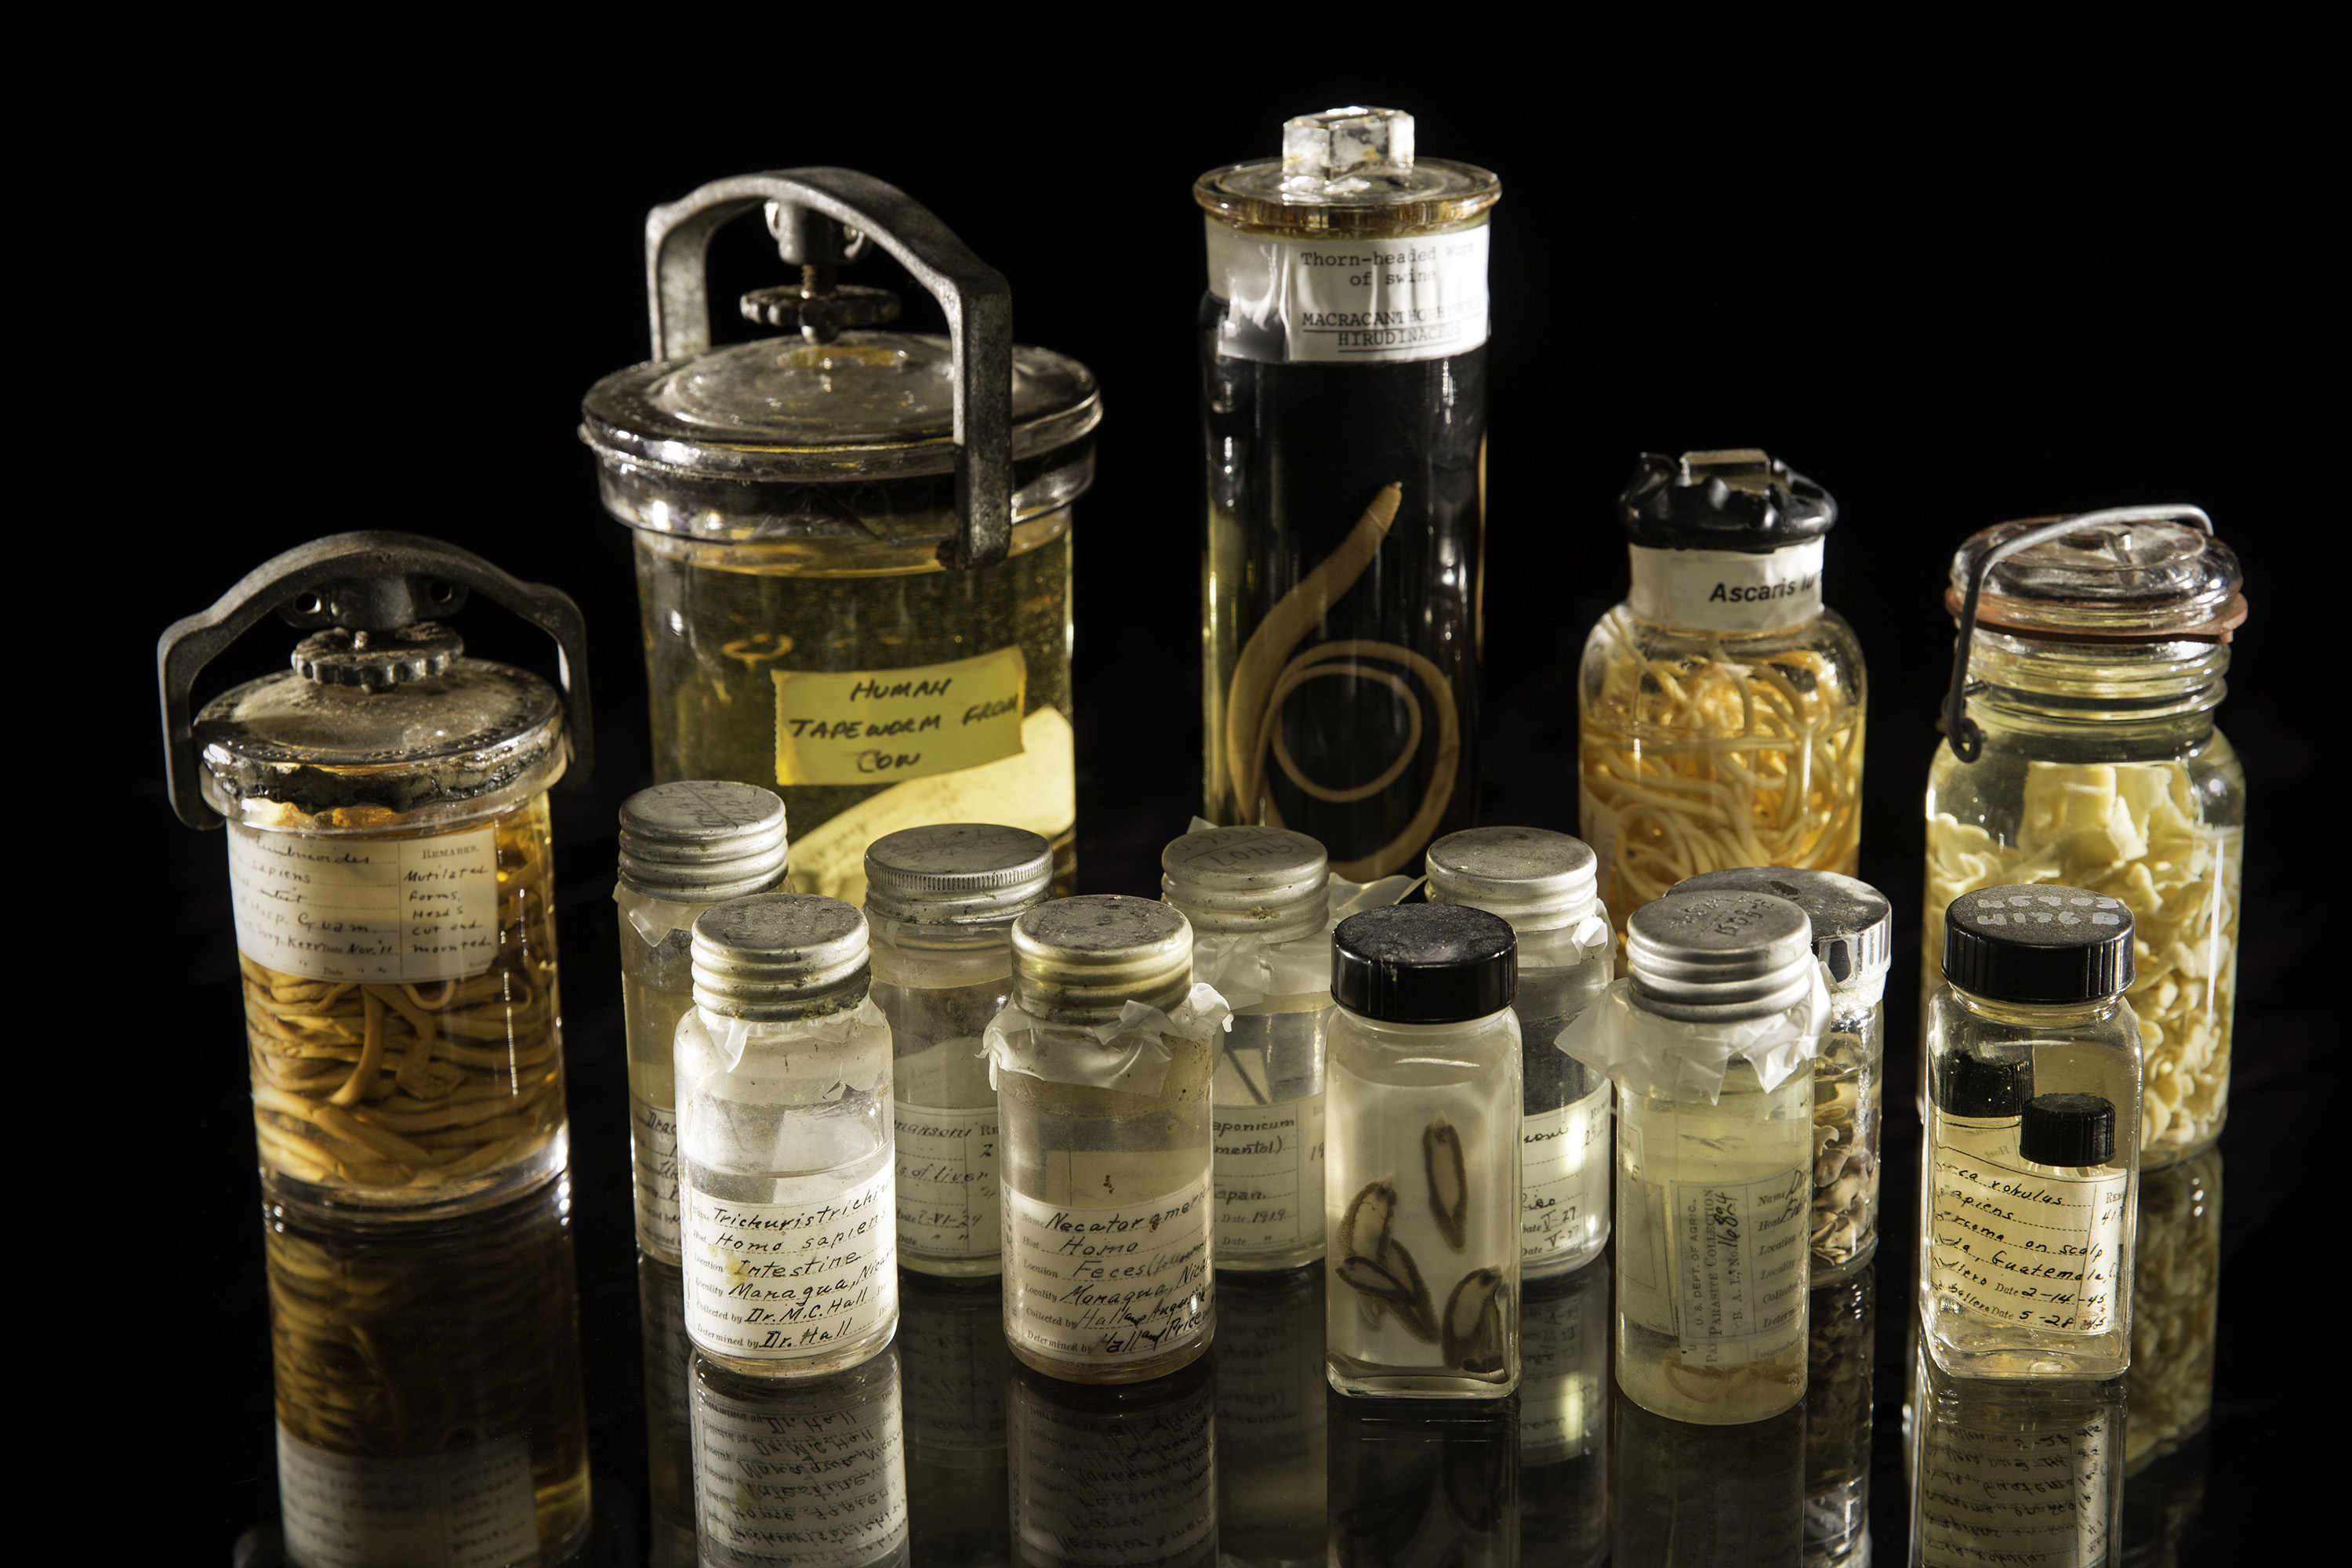 A sampling of specimens from the National Parasite Collection.